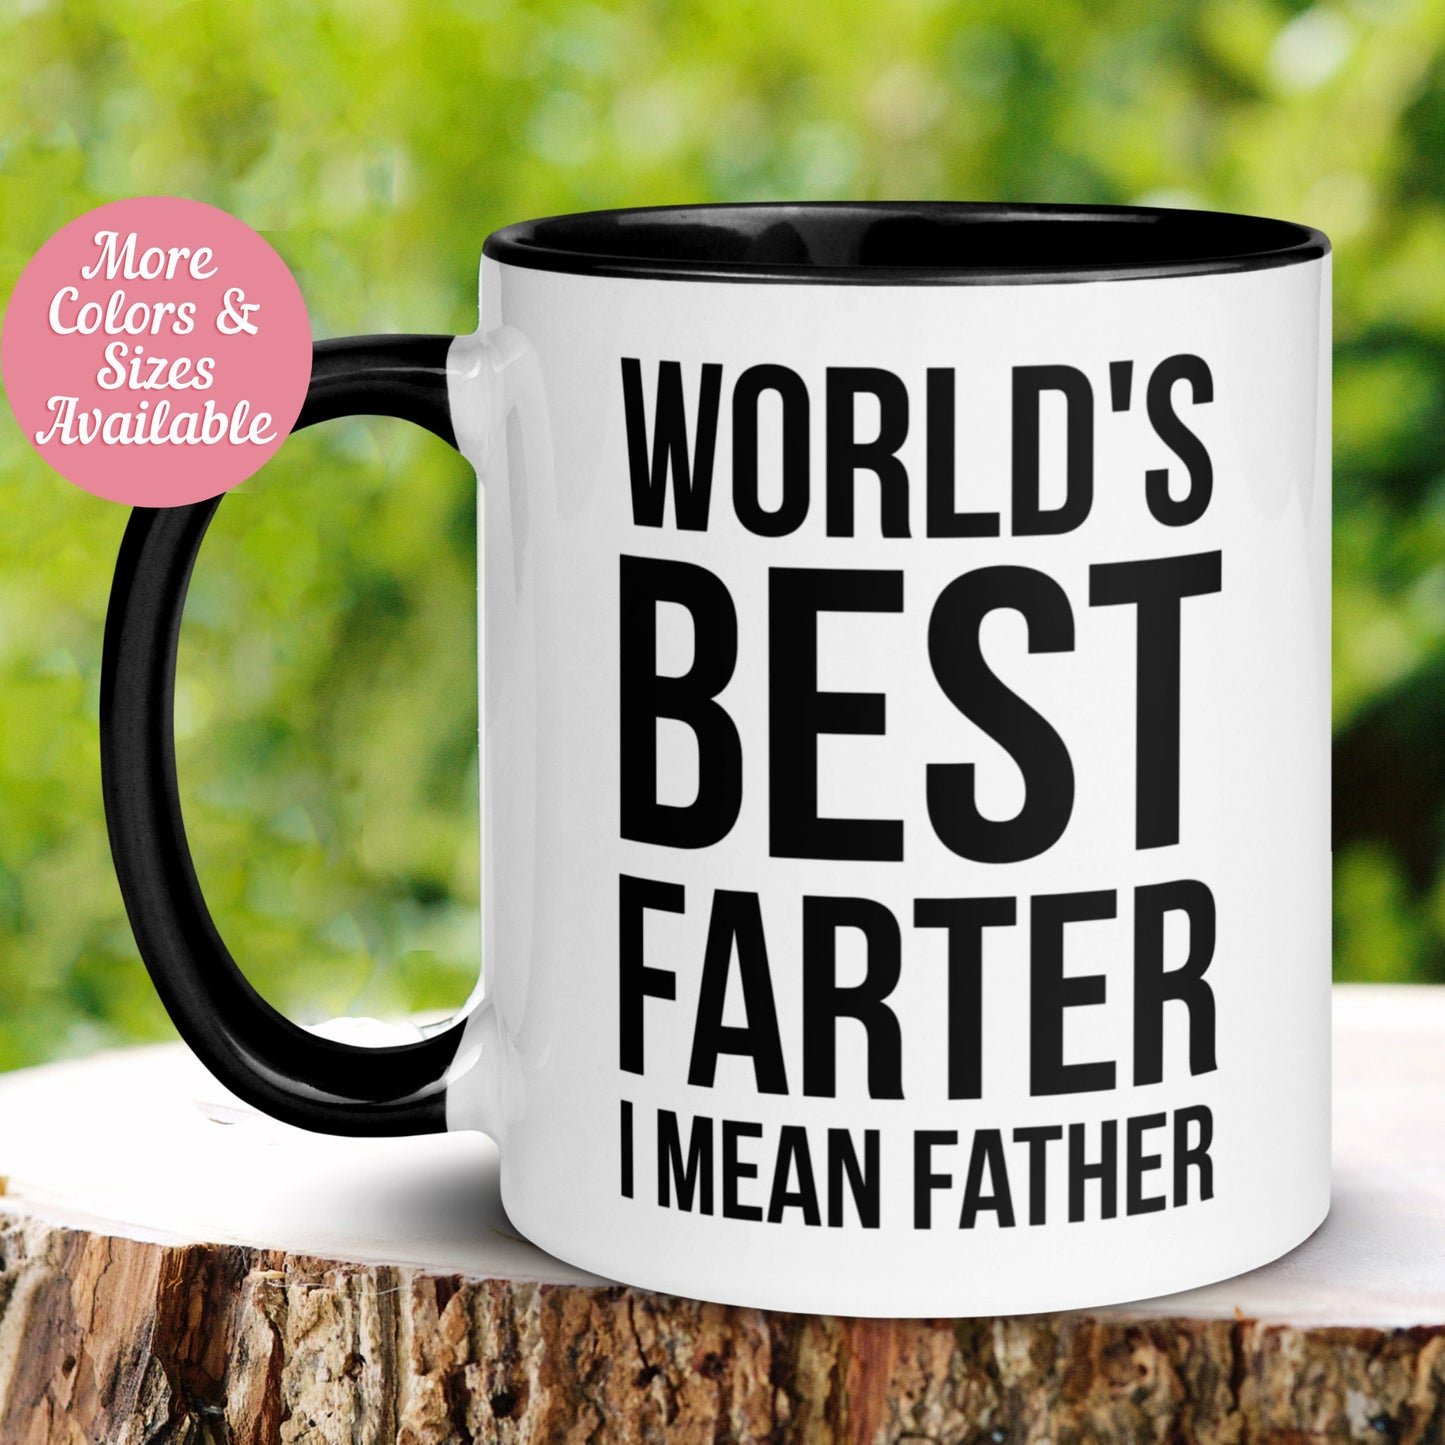 Fathers Day Gift, Father Gift - Zehnaria - FAMILY & FRIENDS - Mugs